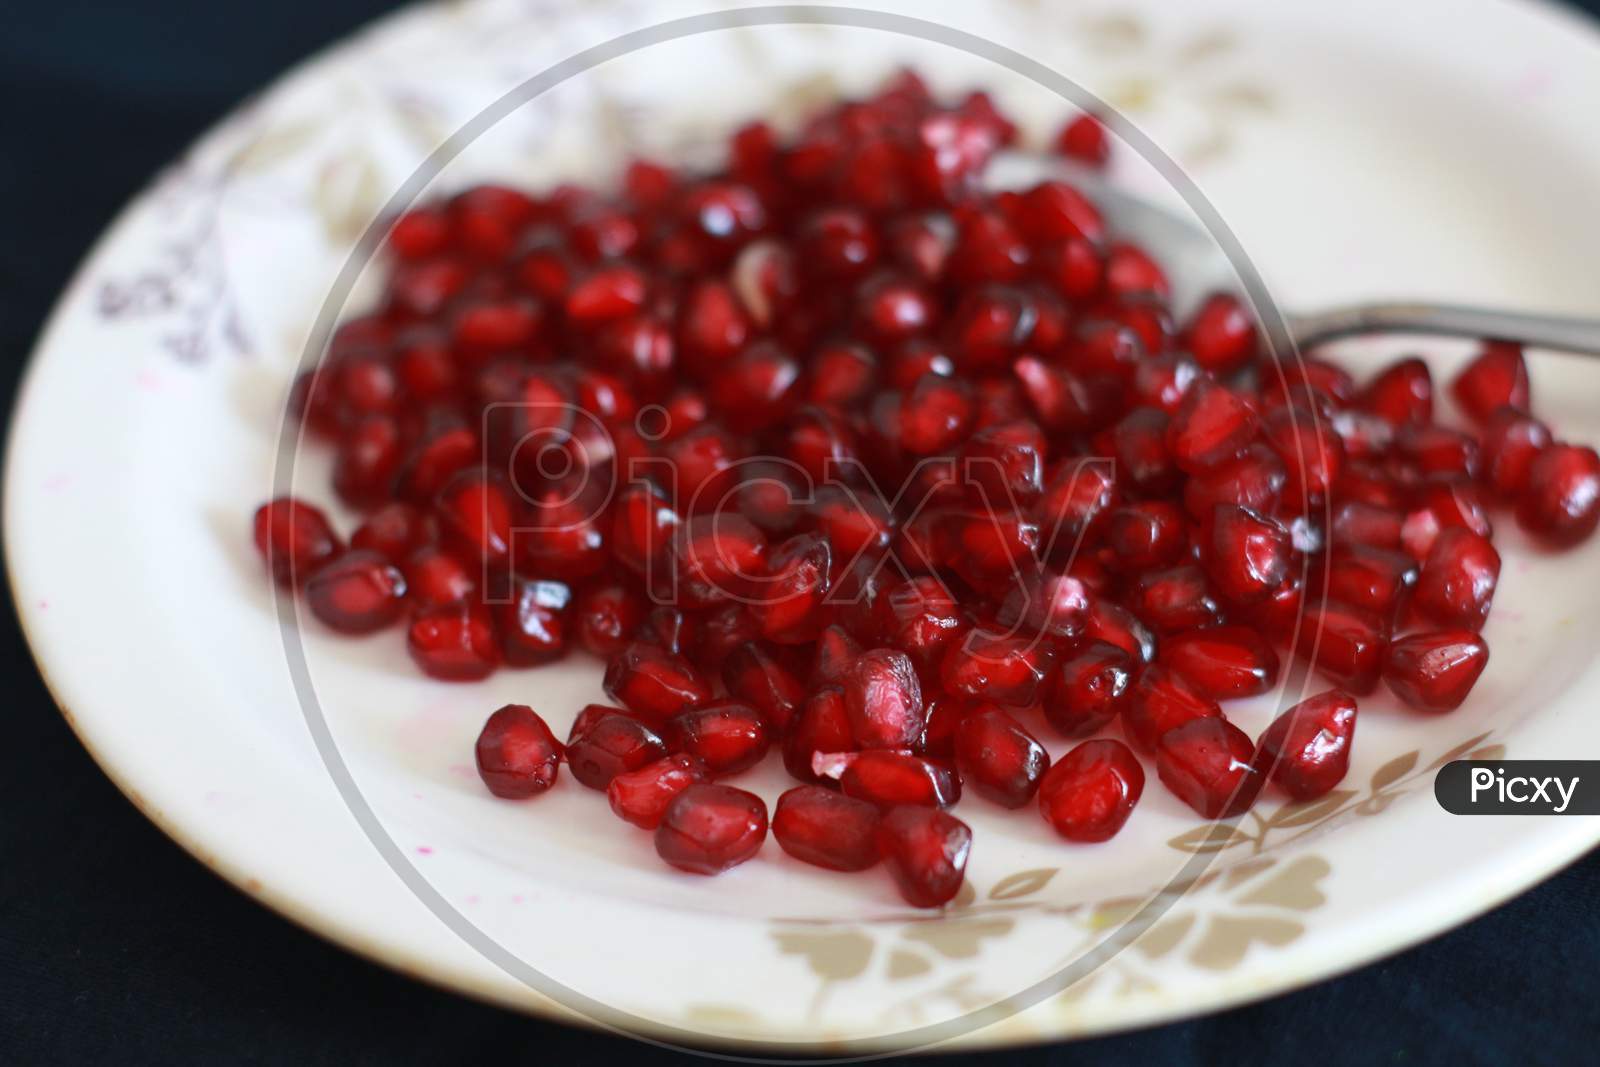 The pomegranate seeds on a plate.